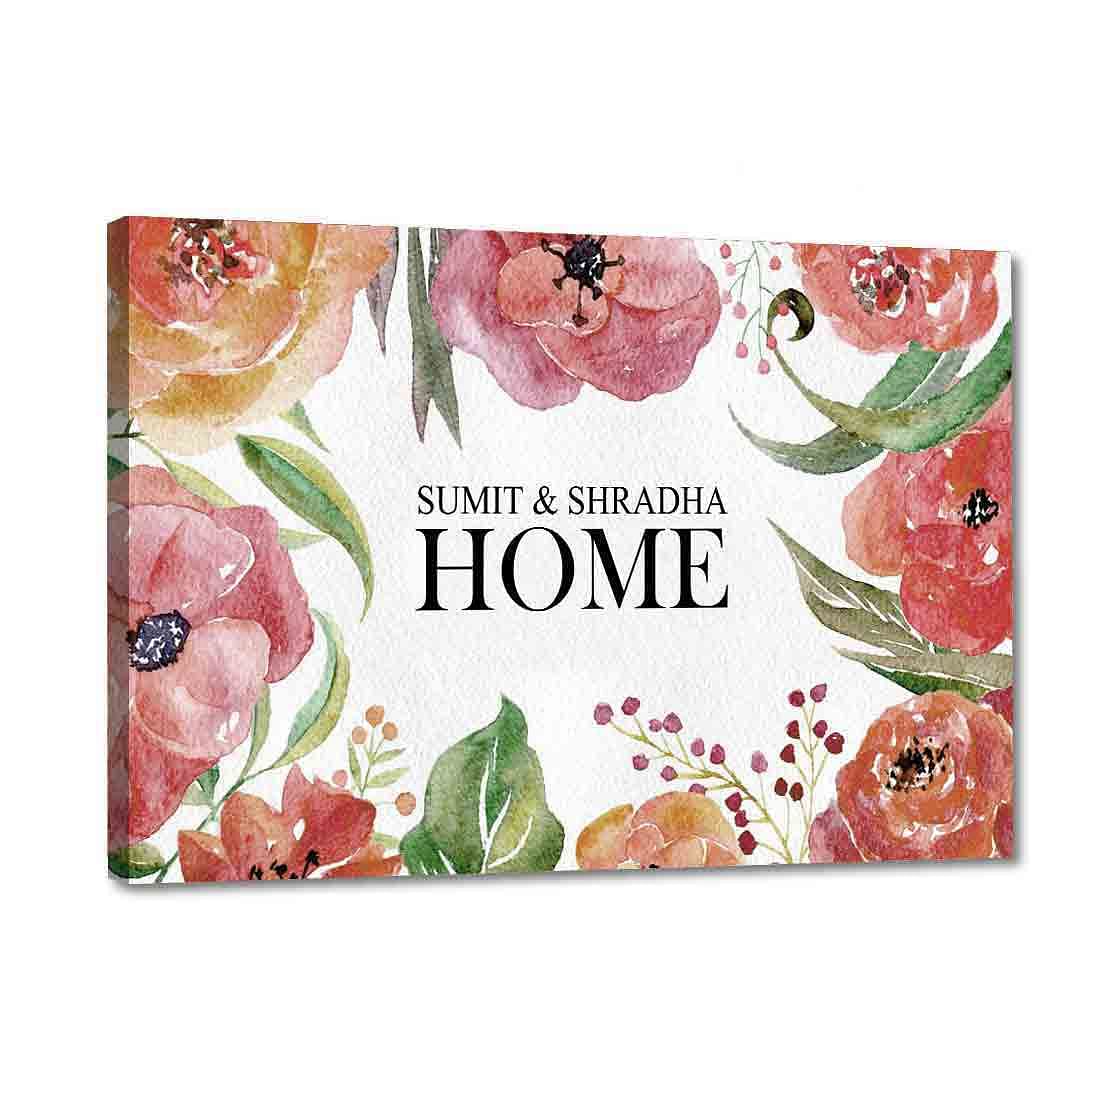 New Personalized Door Name Plate - Red Flowers Nutcase